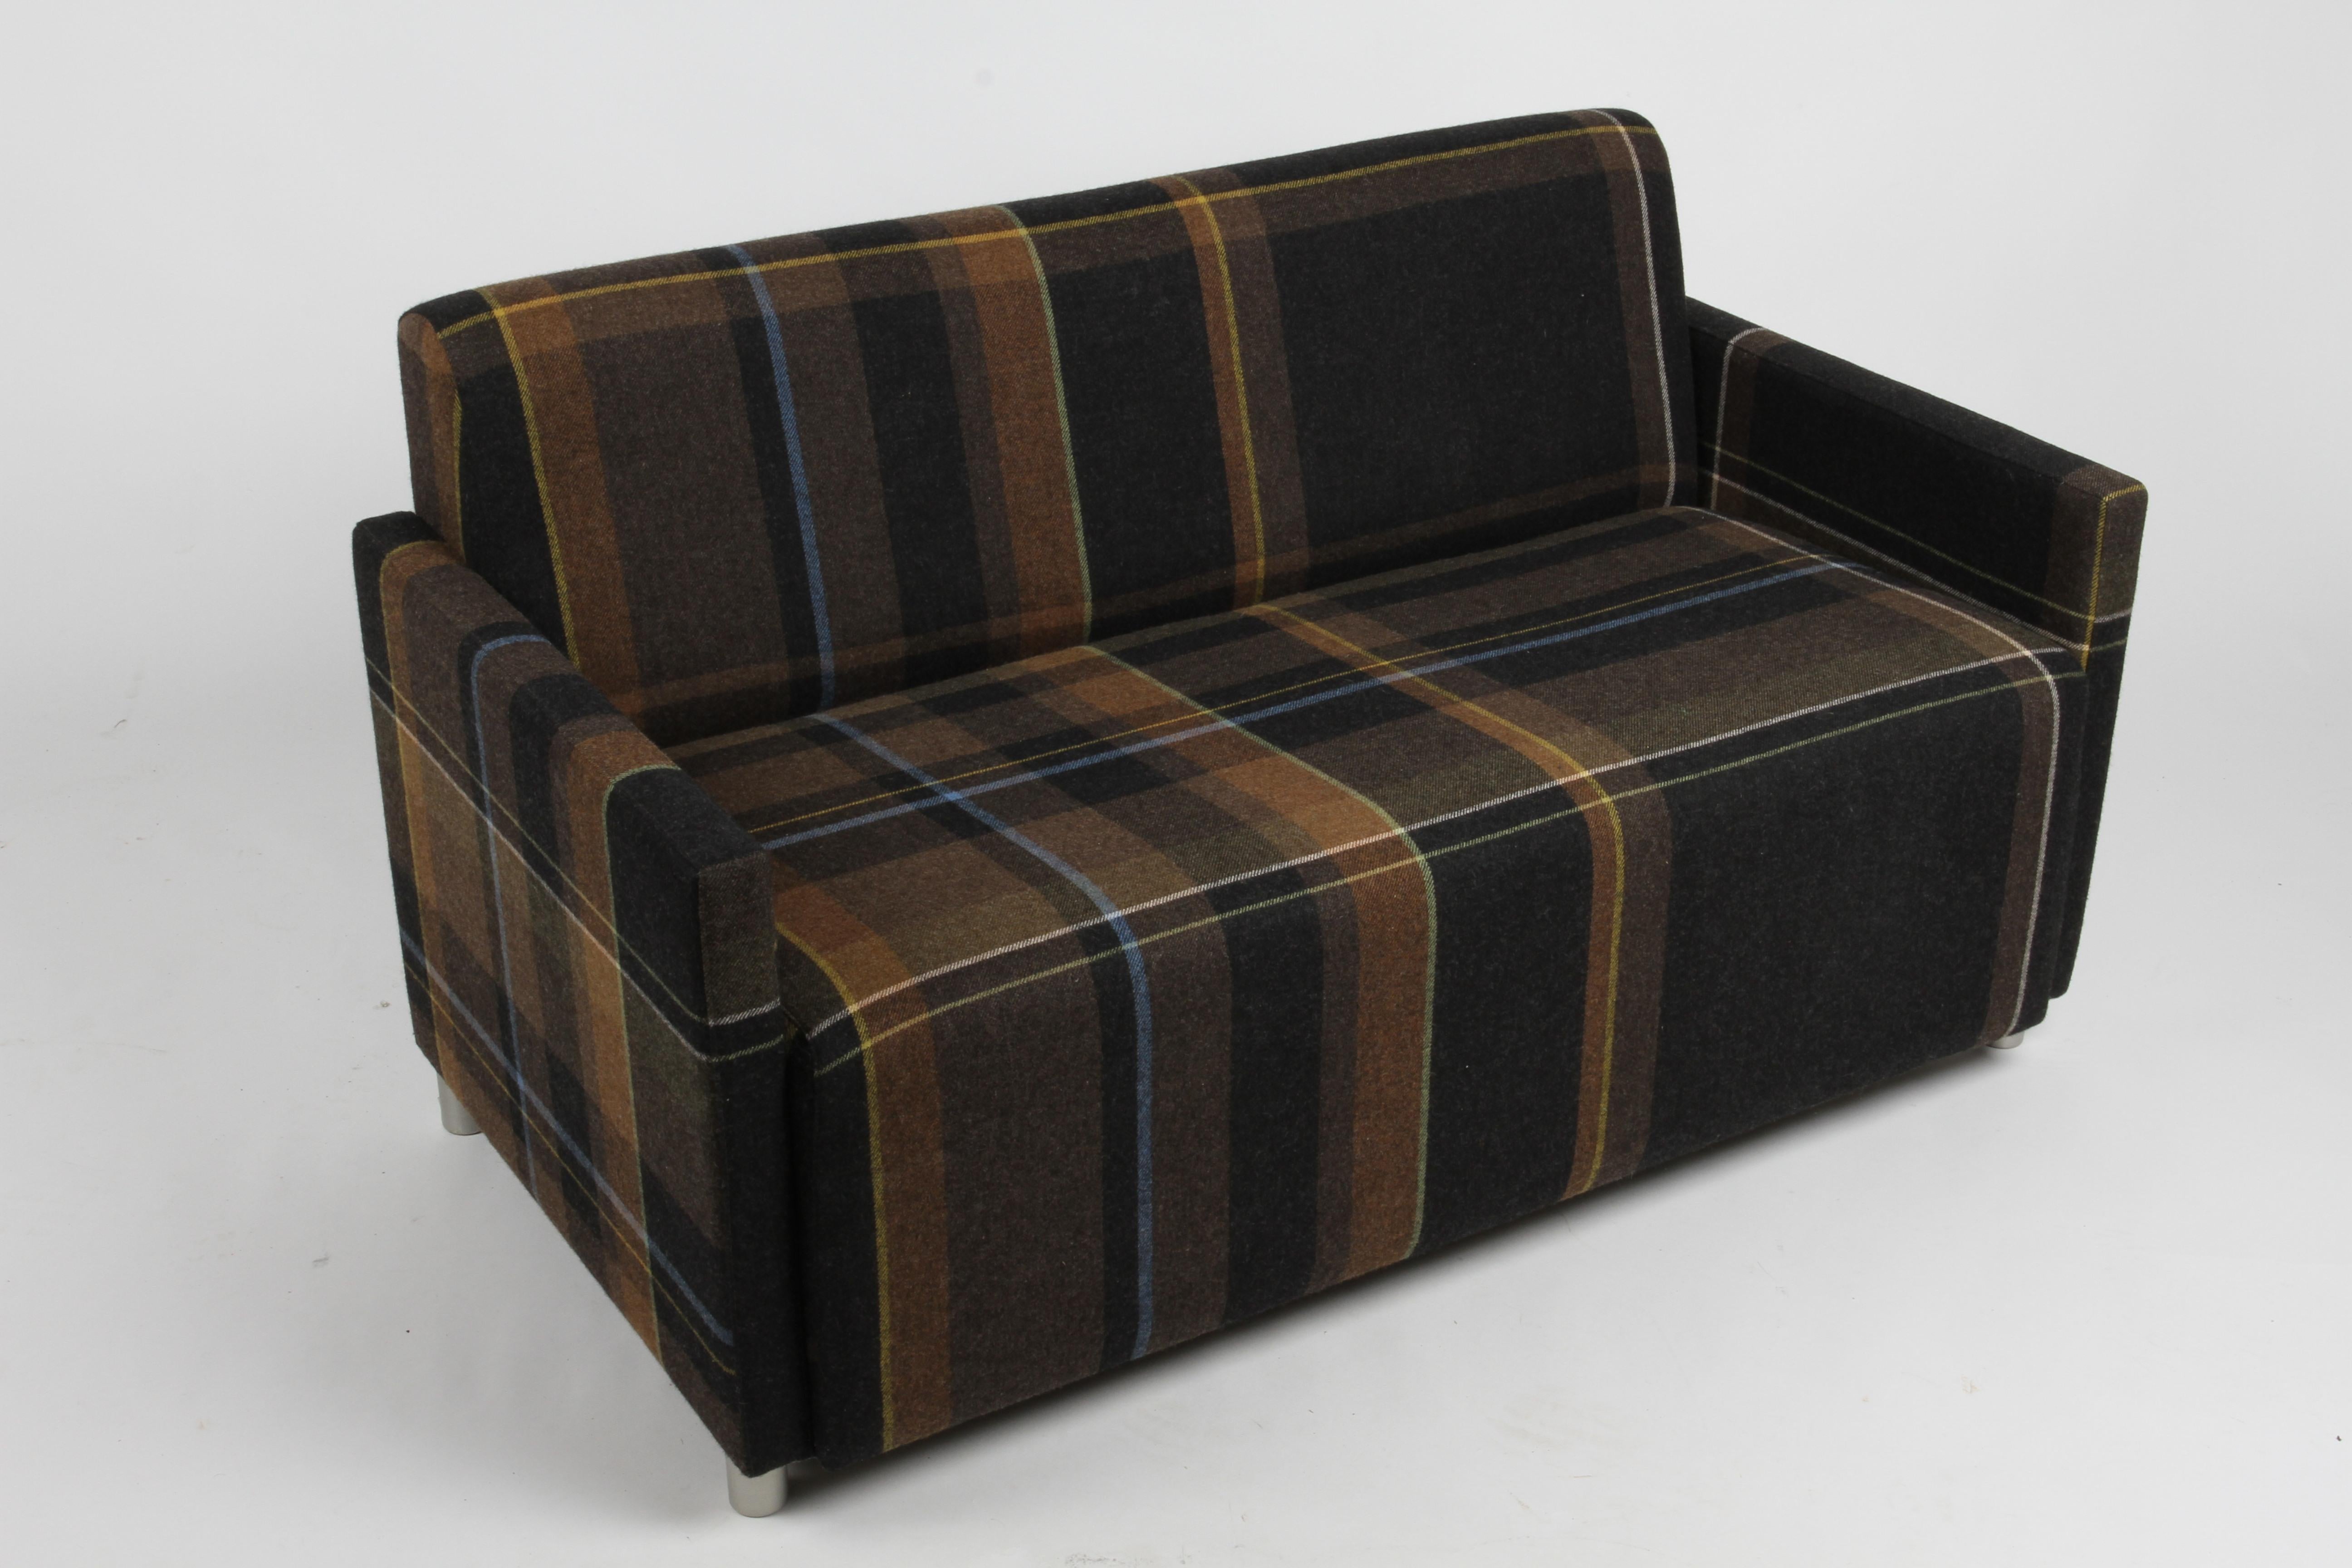 Contemporary Coalesse Settee Upholstered in Paul Smith by Maharam Exaggerated Wool Plaid  For Sale